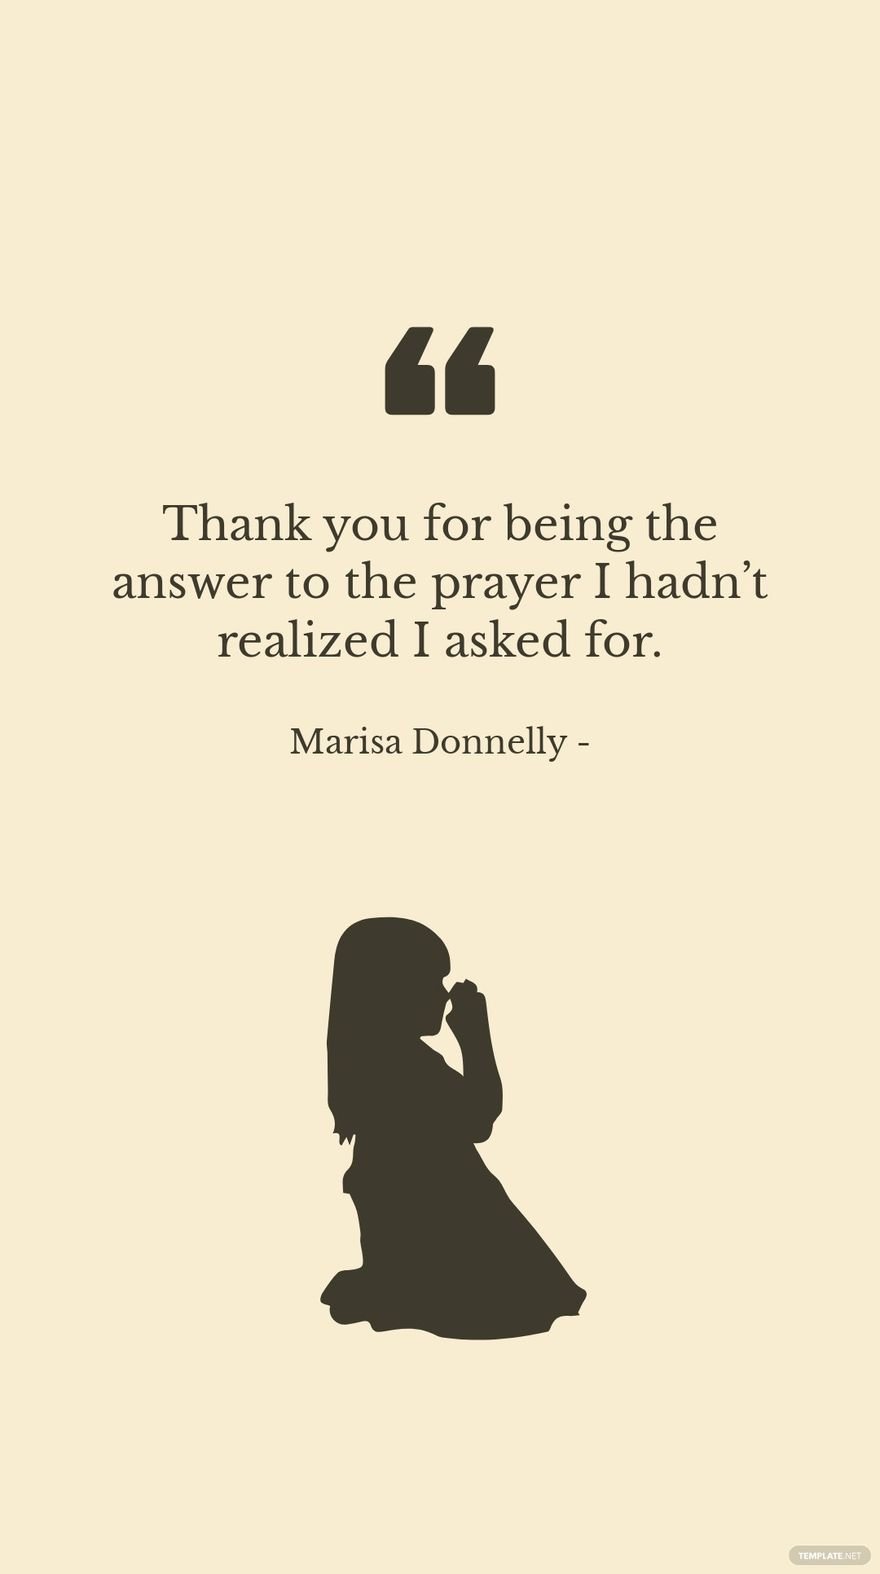 Marisa Donnelly - Thank you for being the answer to the prayer I hadn’t realized I asked for.